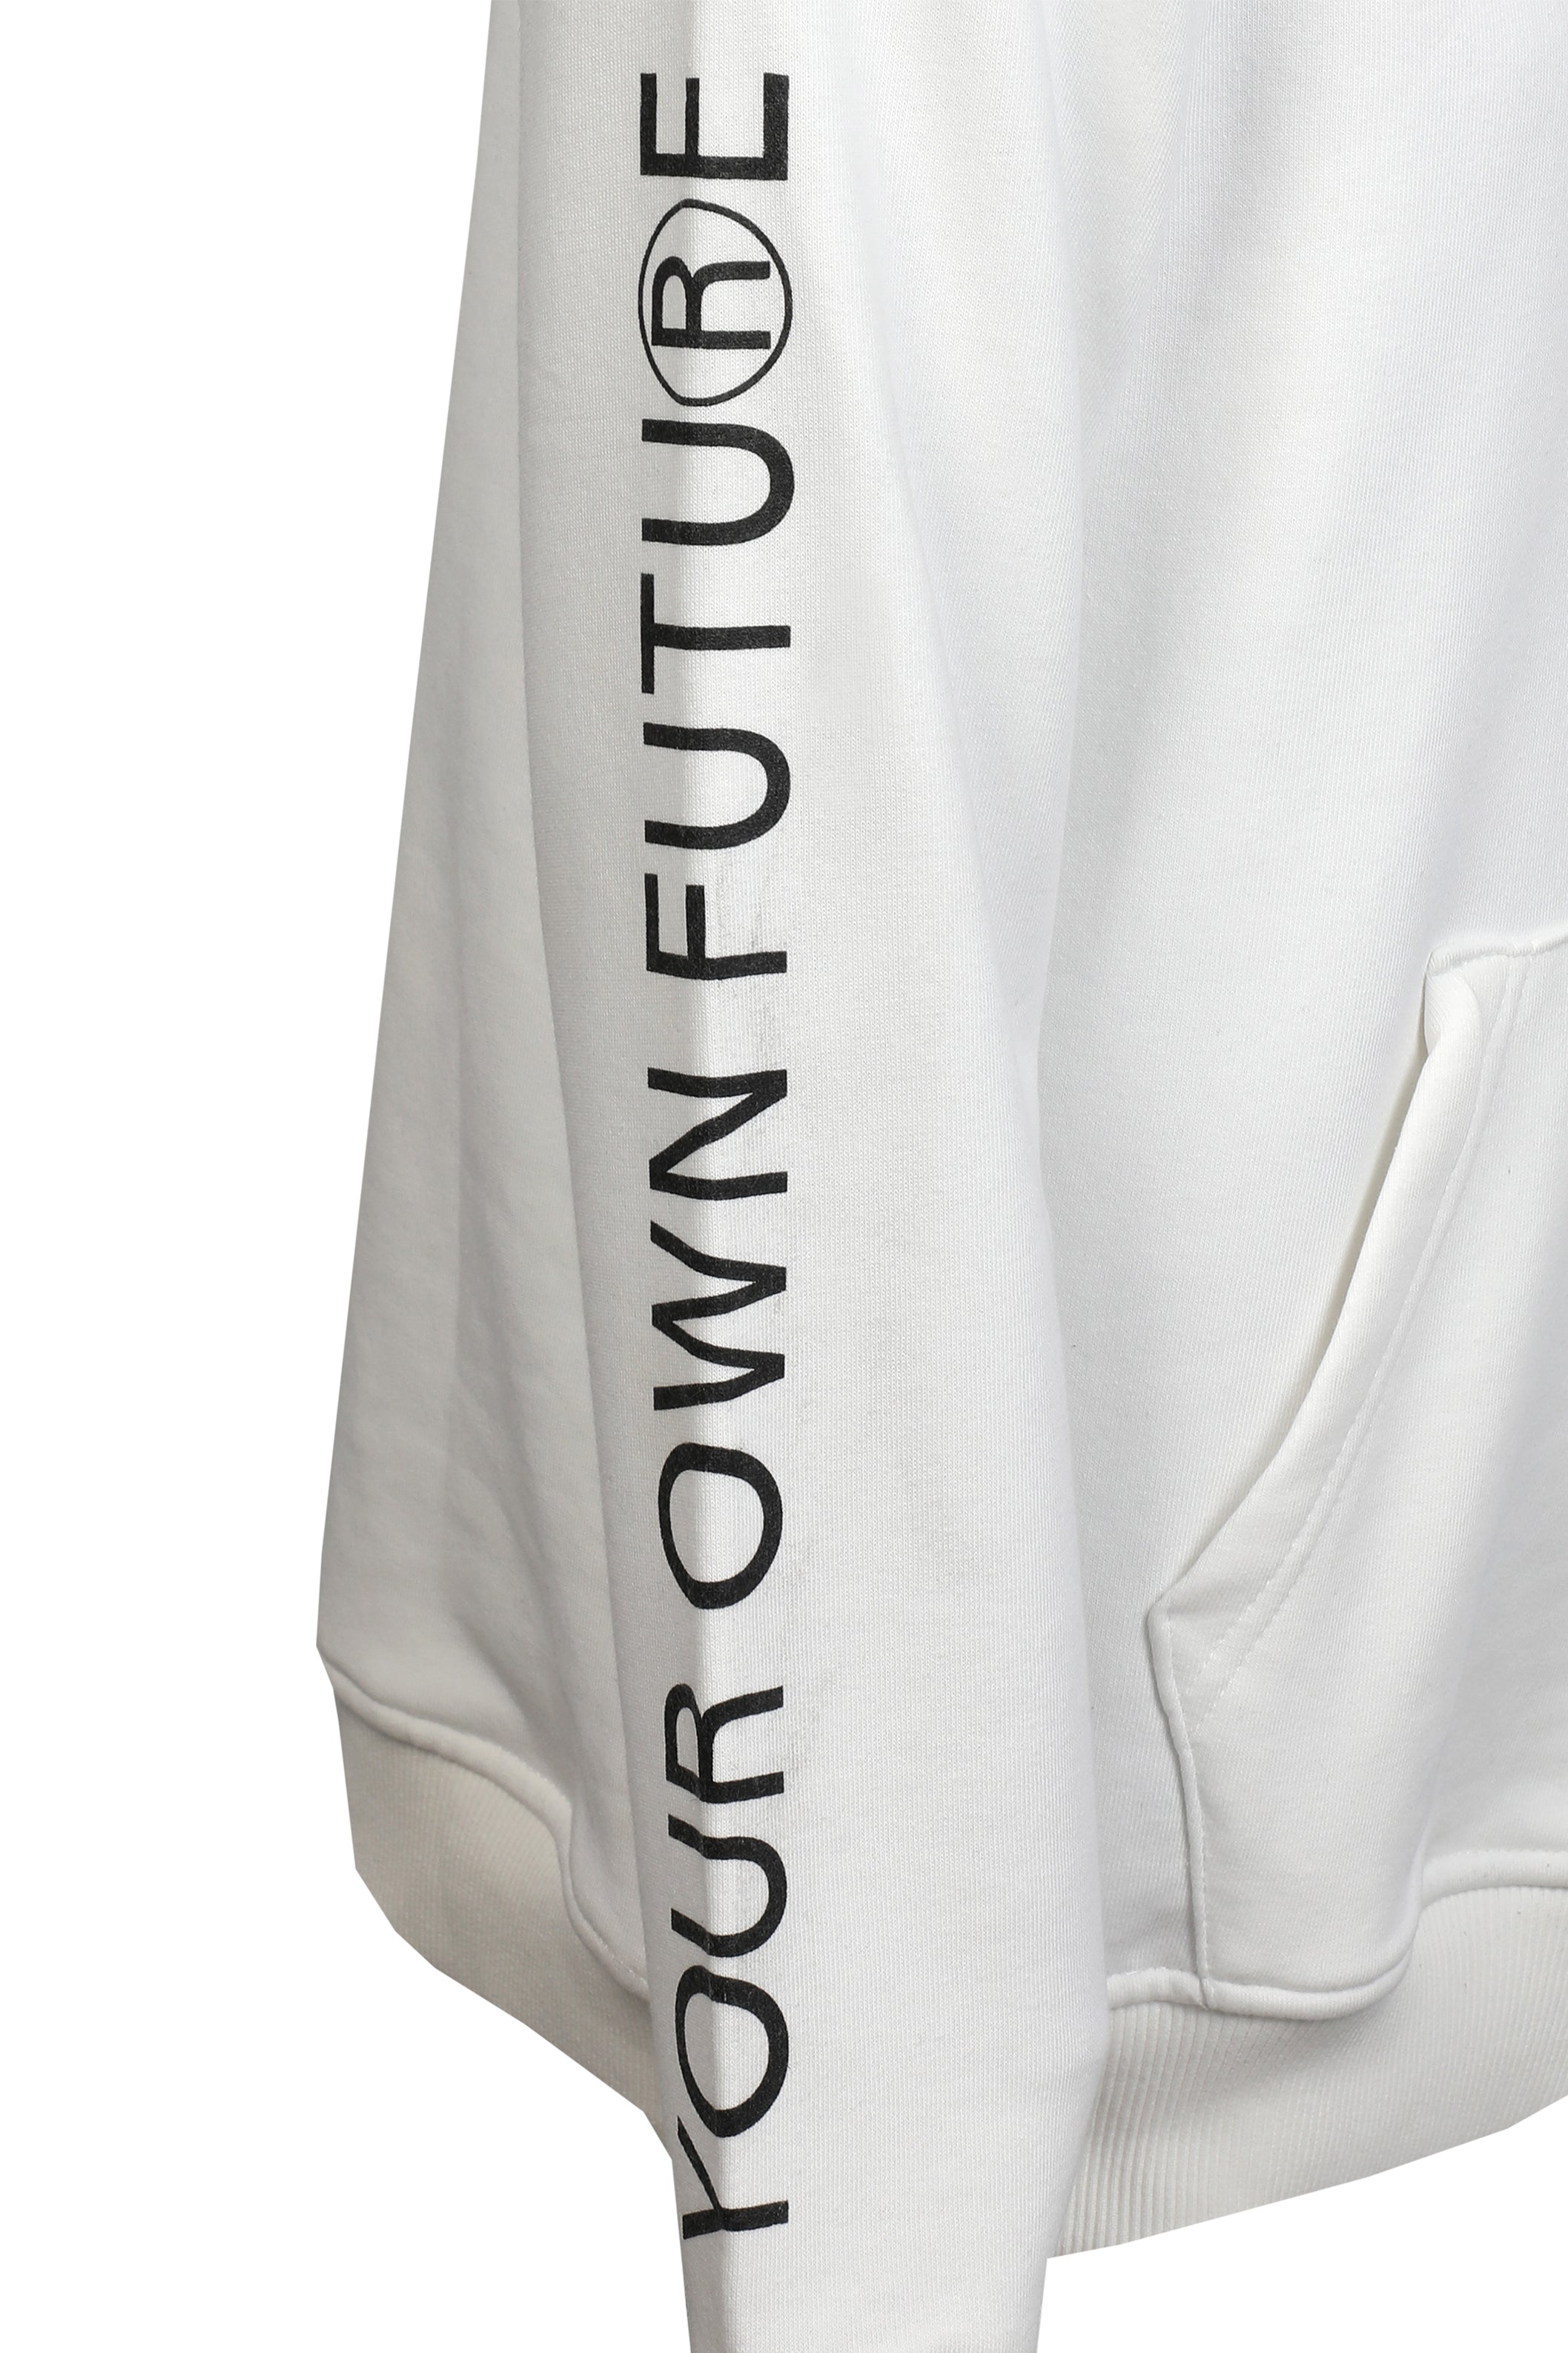 Men "Your Own Future" Designed White Hoodie